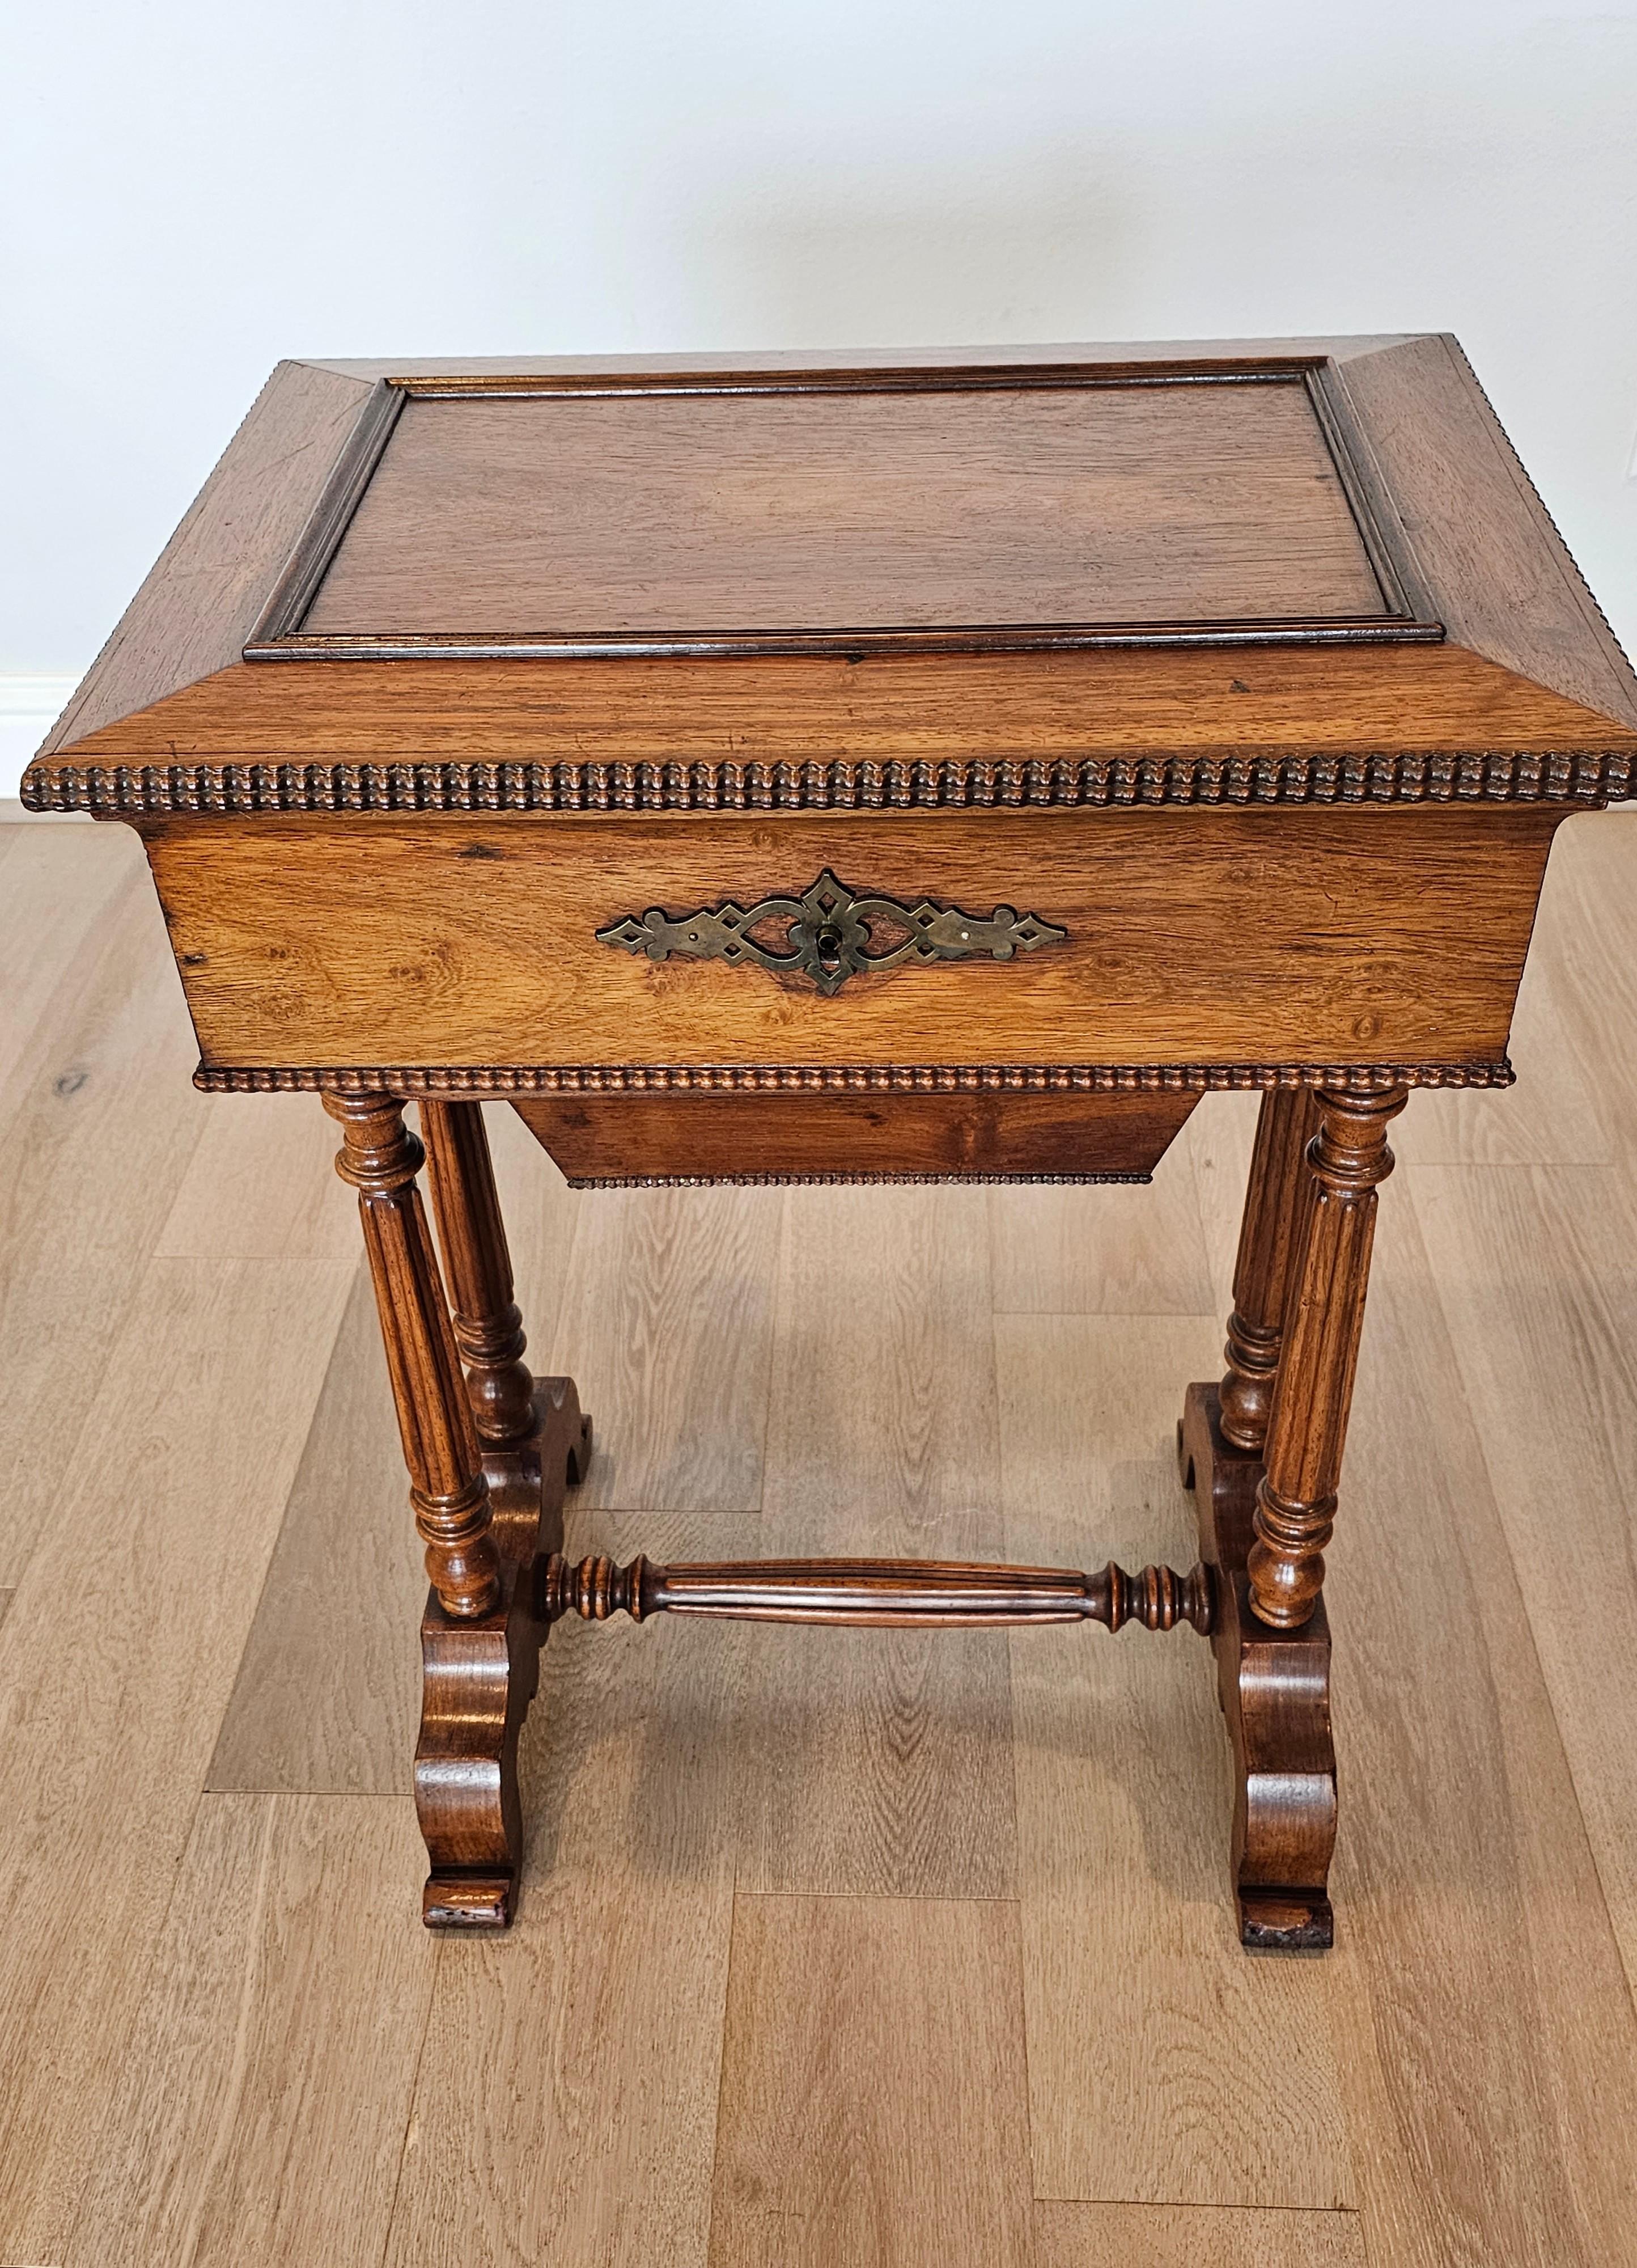 A handsome nearly 200 year old French Louis Philippe period (1830-1848) walnut travailleuse (sewing work table - thread stand)

Born in France in the mid-19th century, hand-crafted of warm rich solid walnut and walnut veneer, having a rectangular